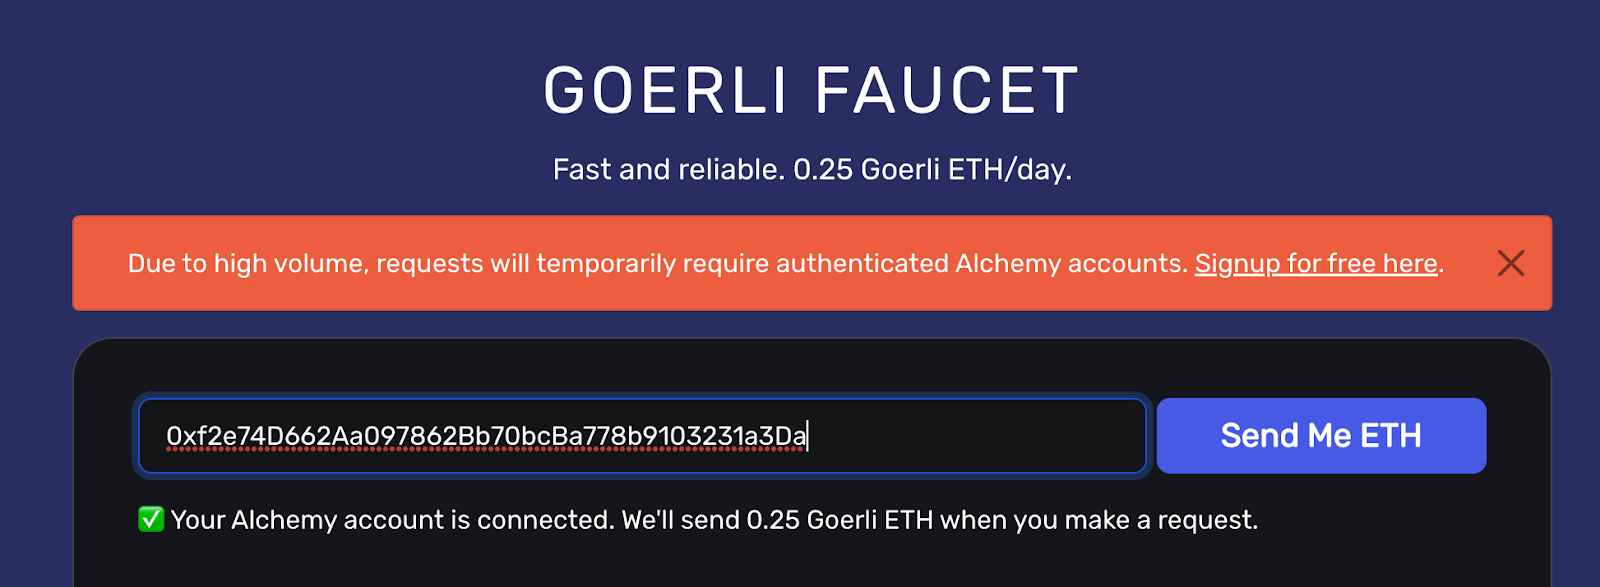 Get testnet ETH from the Goerli Faucet